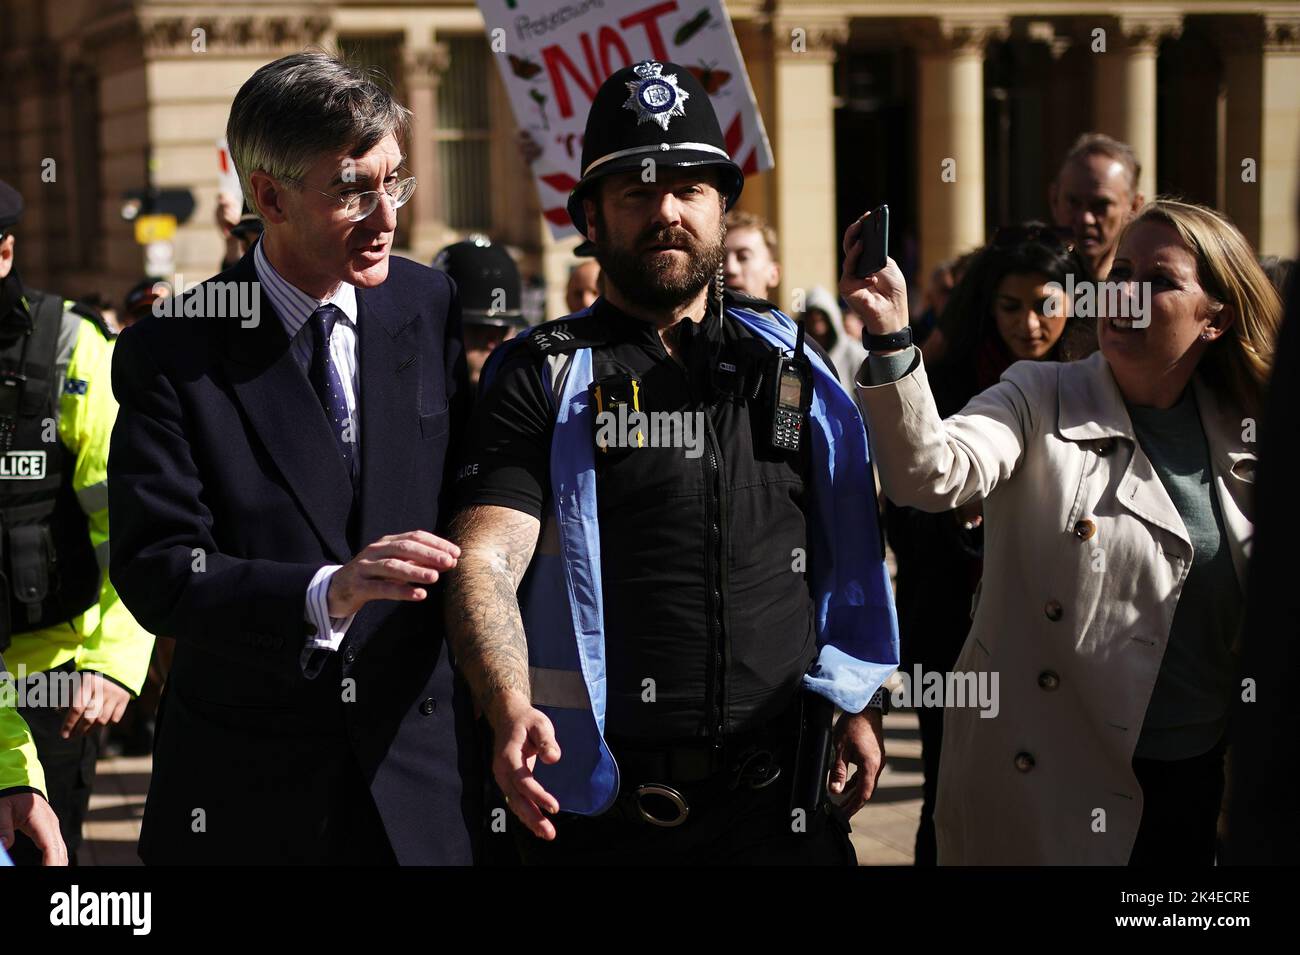 Business Secretary Jacob Rees-Mogg (left) is escorted by a police officer as he arrives at the Conservative Party annual conference at the International Convention Centre in Birmingham. Picture date: Sunday October 2, 2022. Stock Photo